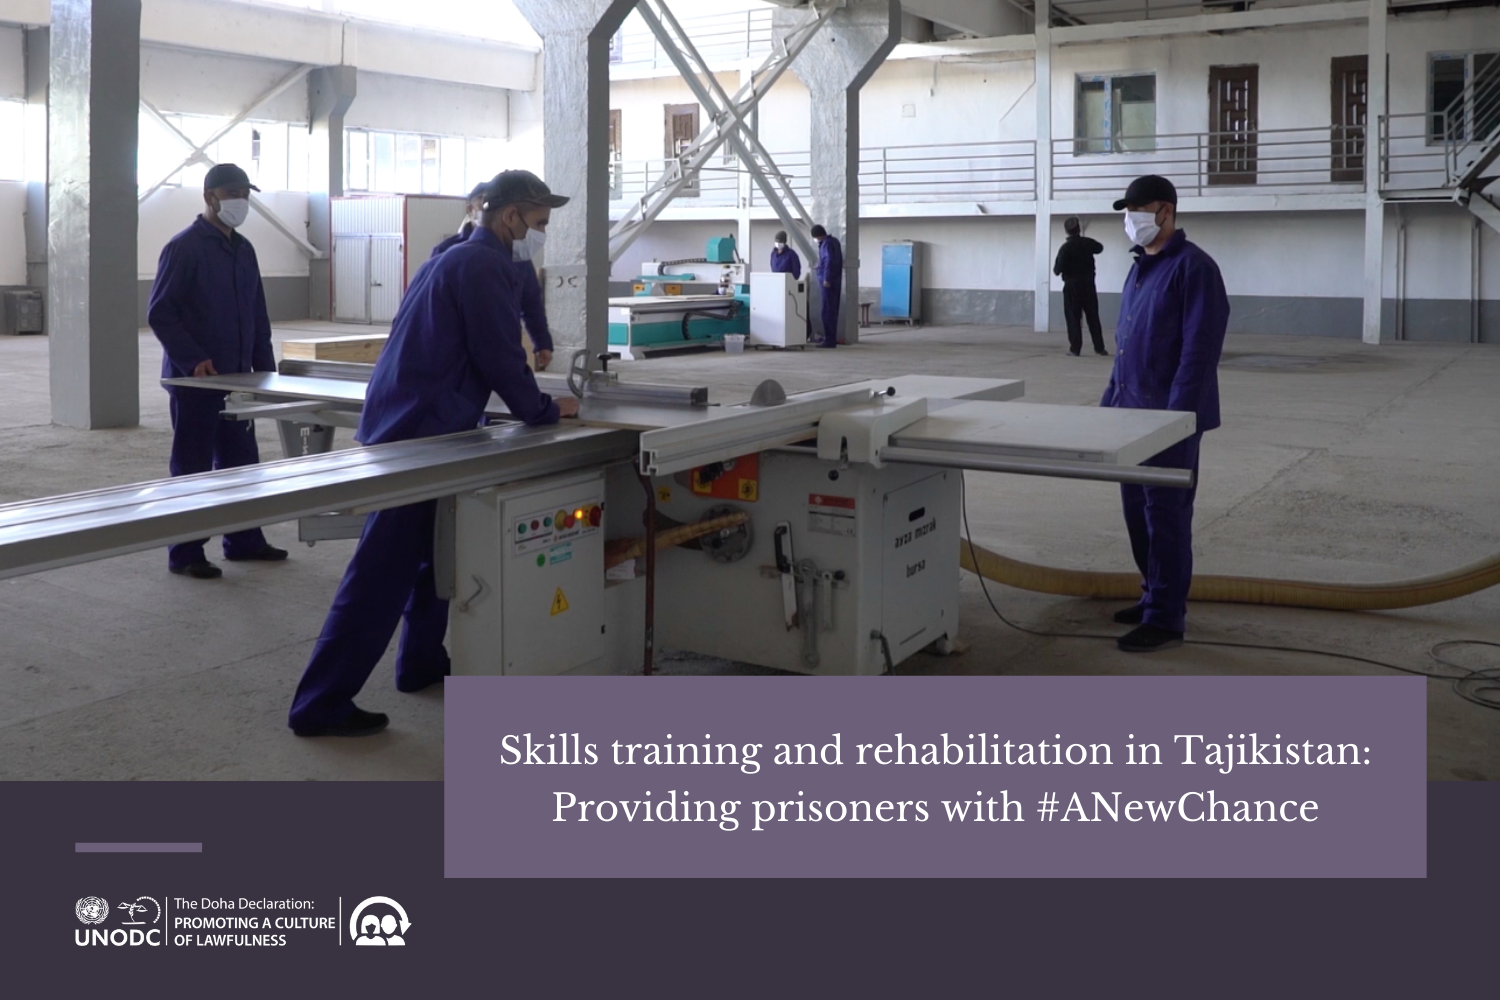 With metalwork and woodwork, UNODC supports prisoner rehabilitation in Tajikistan